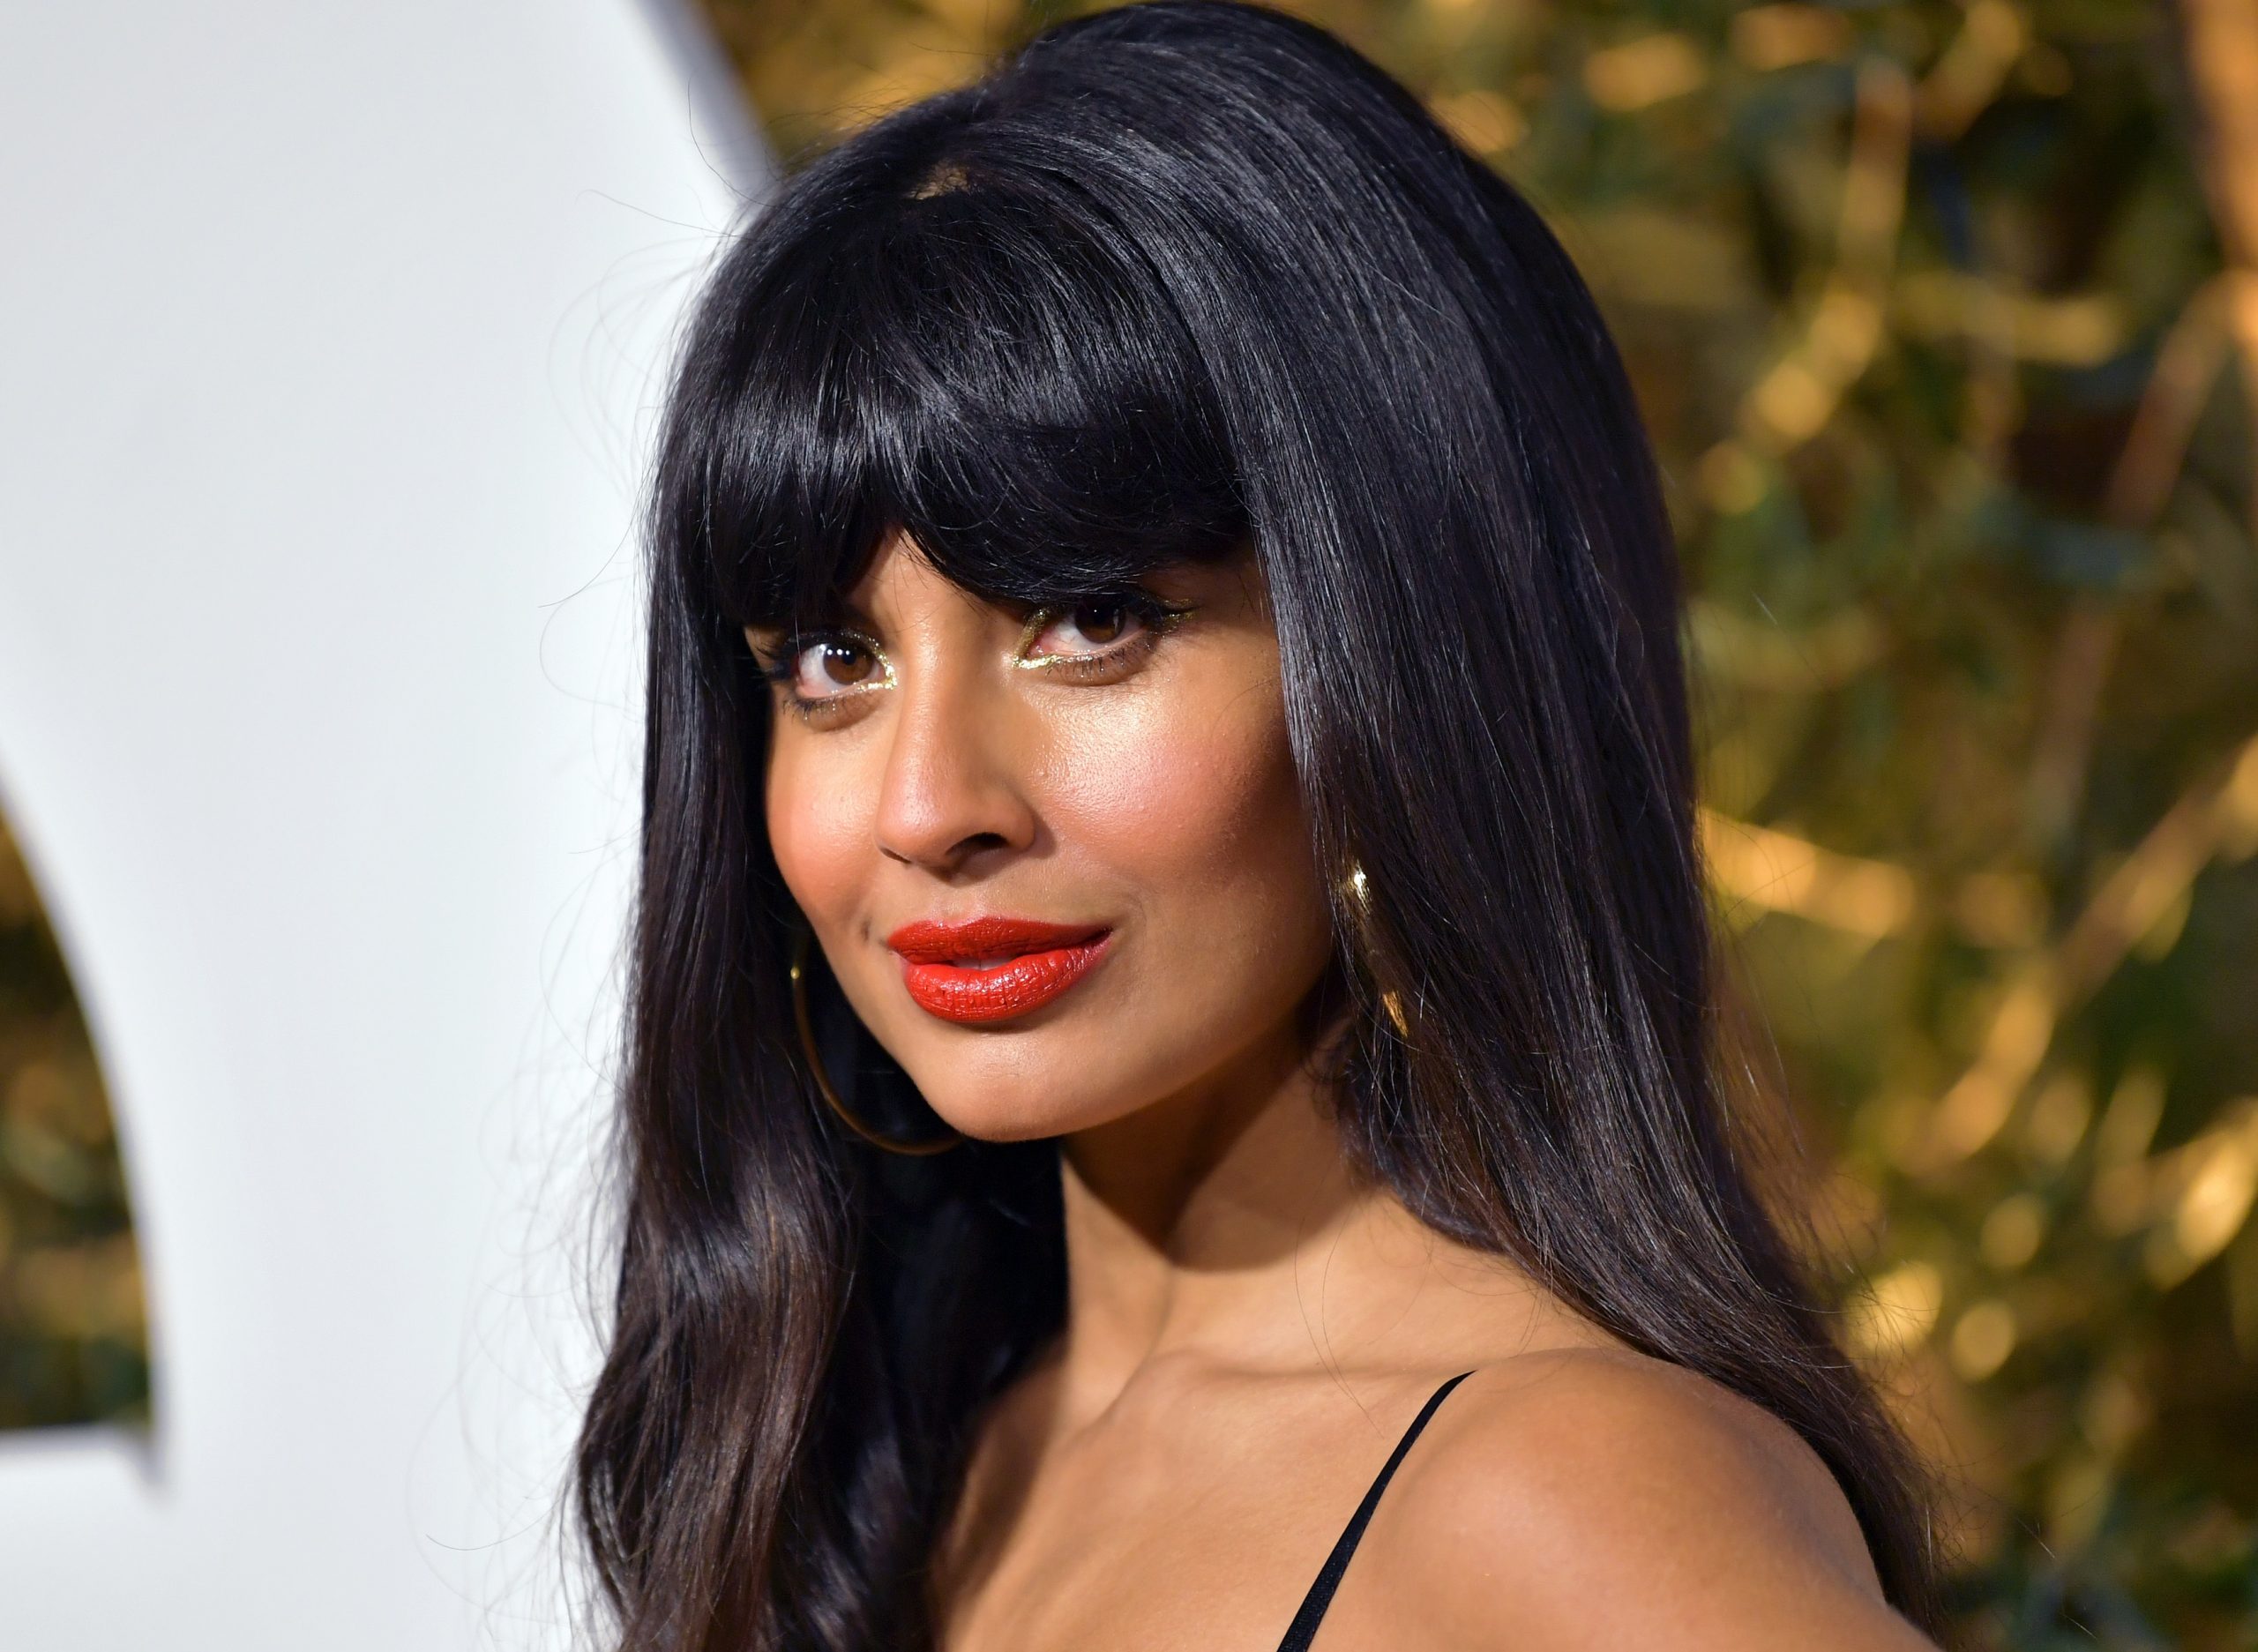 Jameela Jamil accuses stars of using ‘weight loss injections’